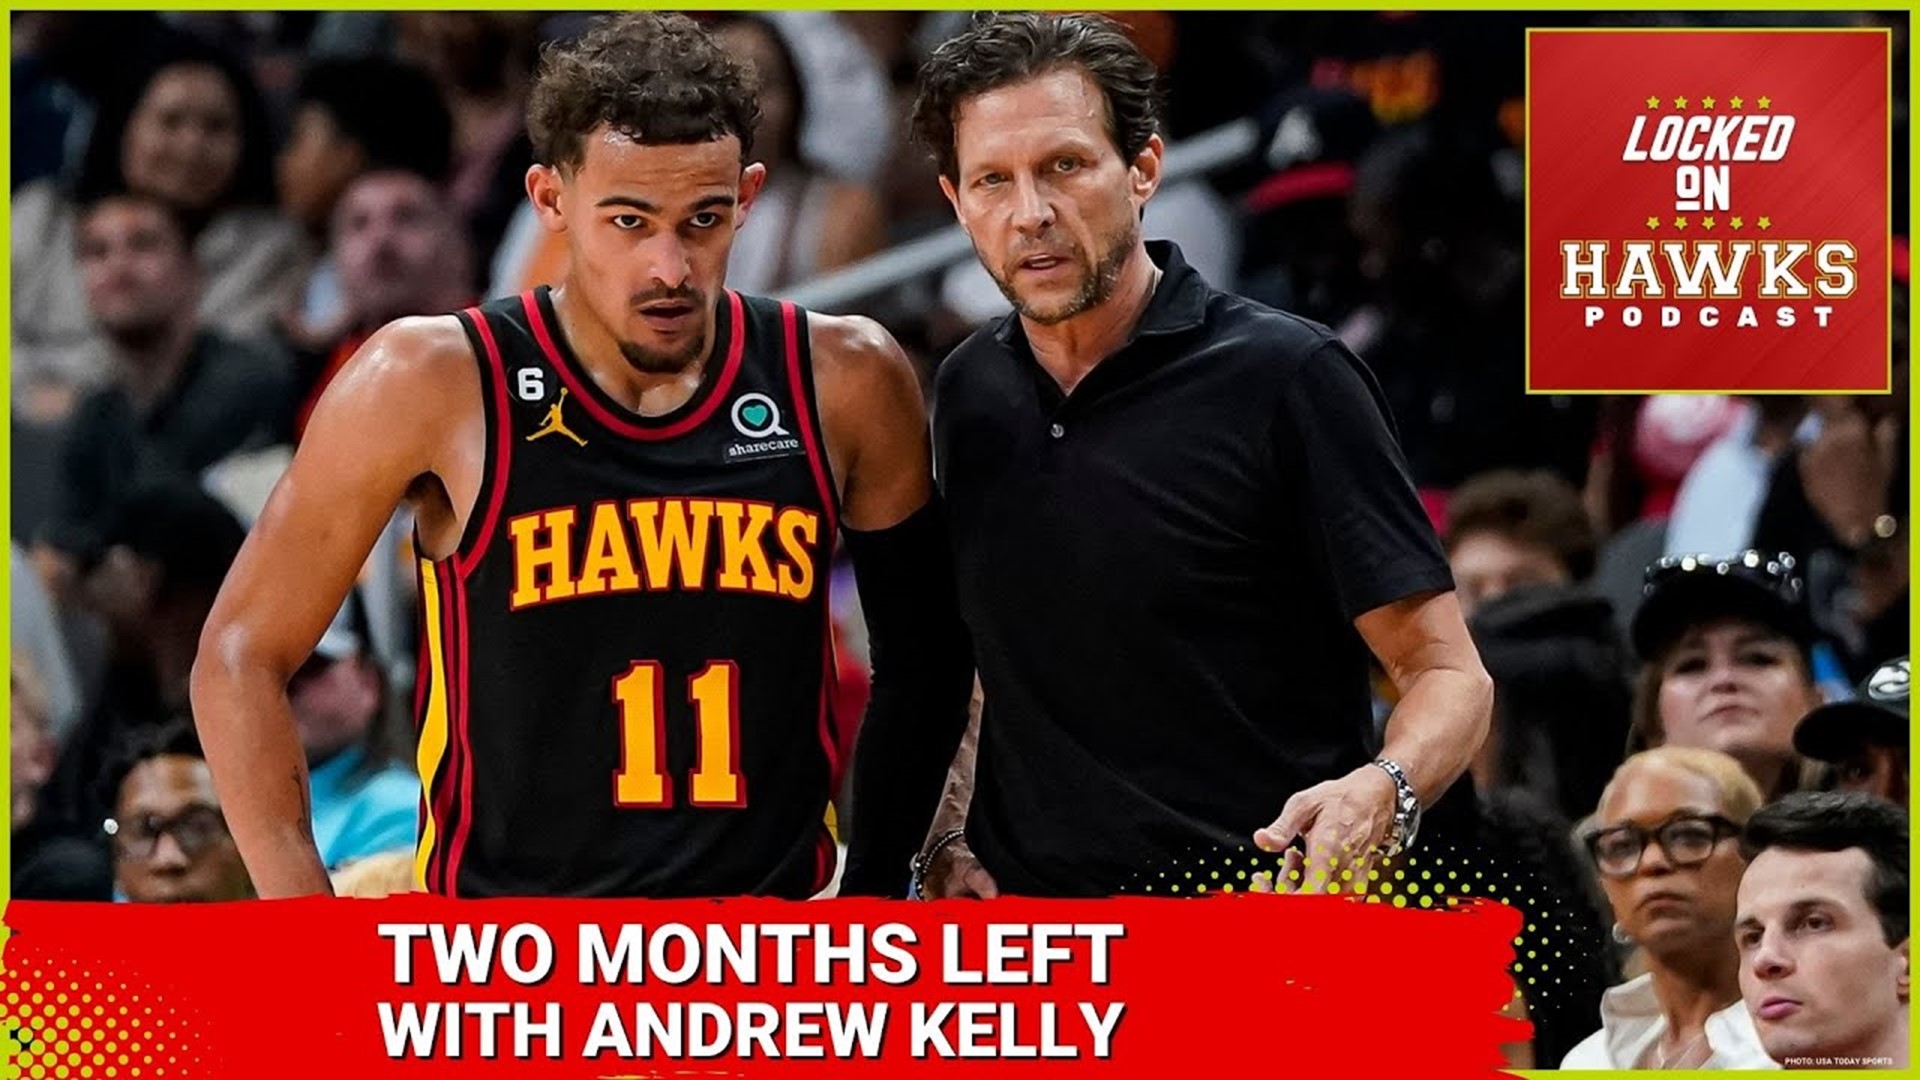 Brad Rowland (@BTRowland, DIME on UPROXX) hosts episode No. 1537 of the Locked on Hawks podcast, and he is joined by Andrew Kelly (@andlankell) for Part 1 of a 2-par